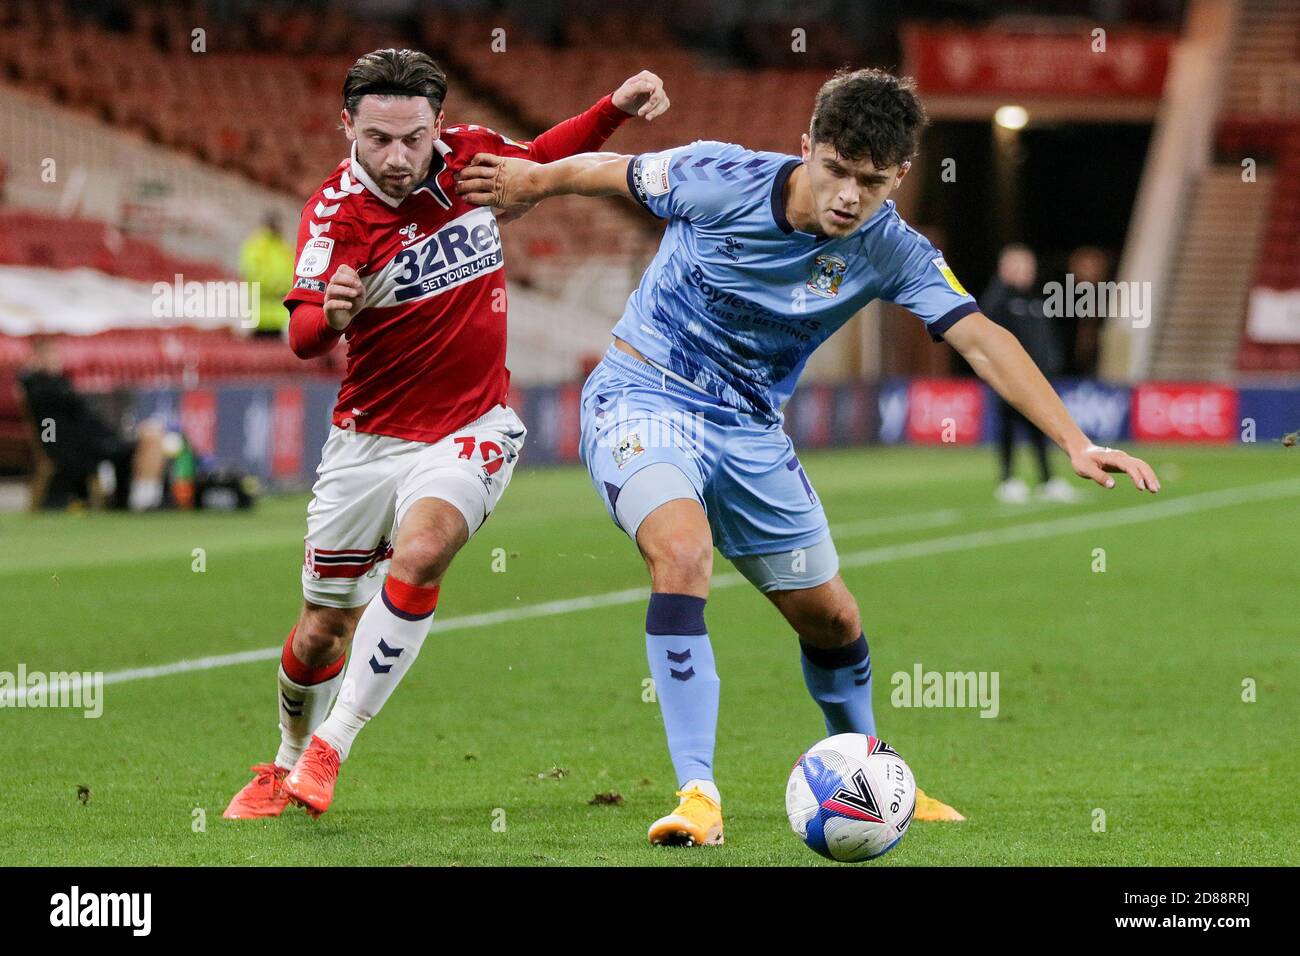 Ryan Giles of Coventry City and Patrick Roberts of Middlesbrough - Middlesbrough v Coventry City, Sky Bet Championship, Riverside Stadium, Middlesbrough, UK - 27th October 2020  Editorial Use Only - DataCo restrictions apply Stock Photo